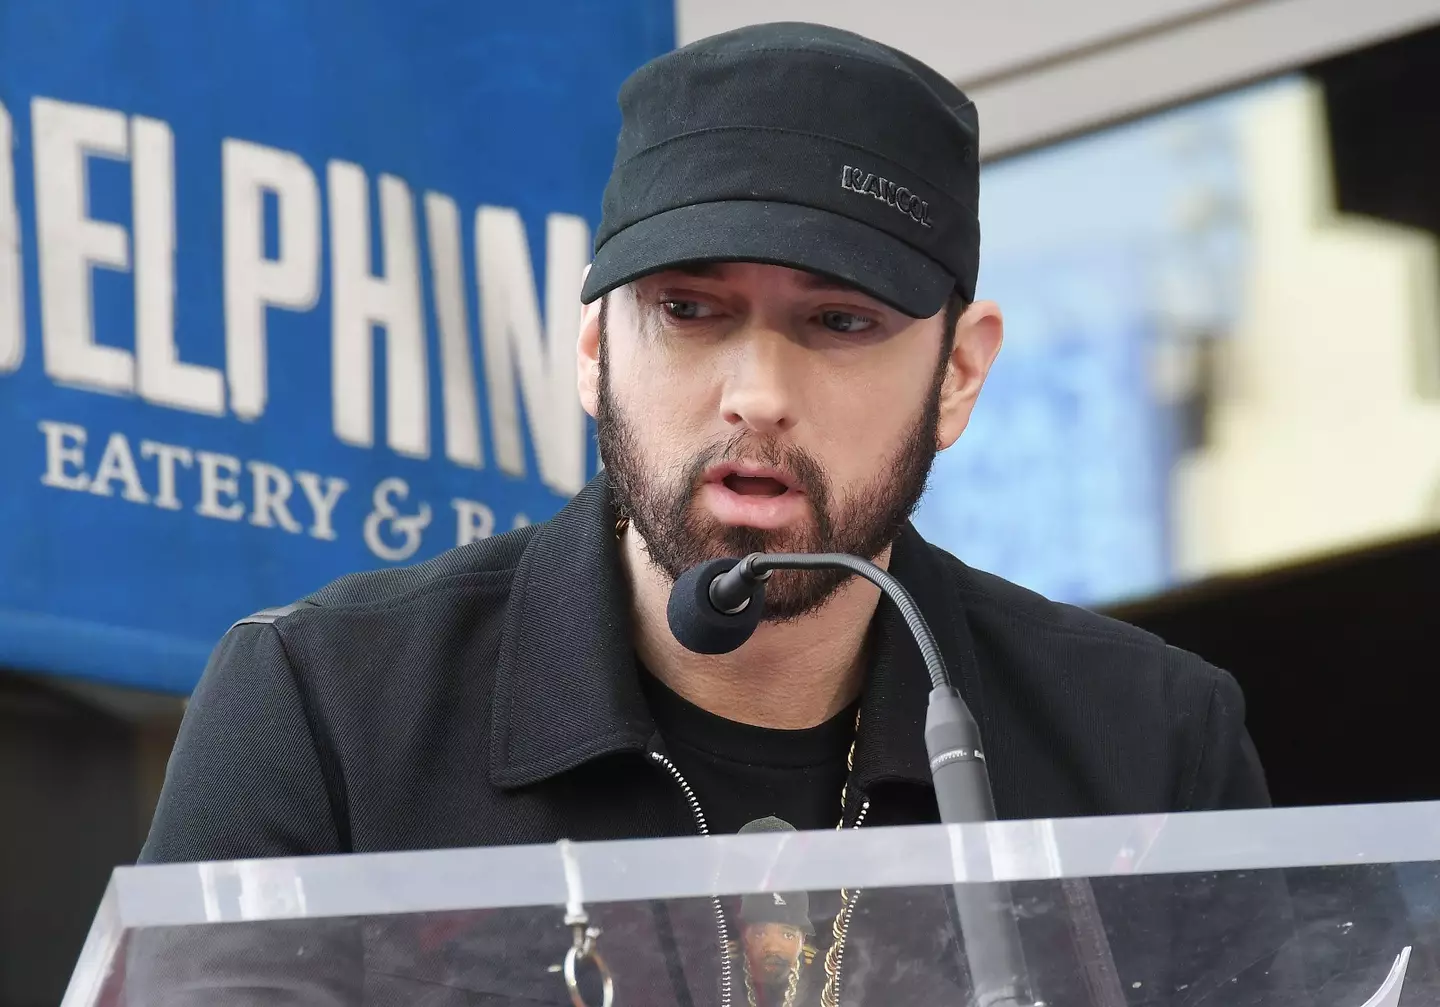 Eminem has previously hinted he will stop making music at the age of 50.